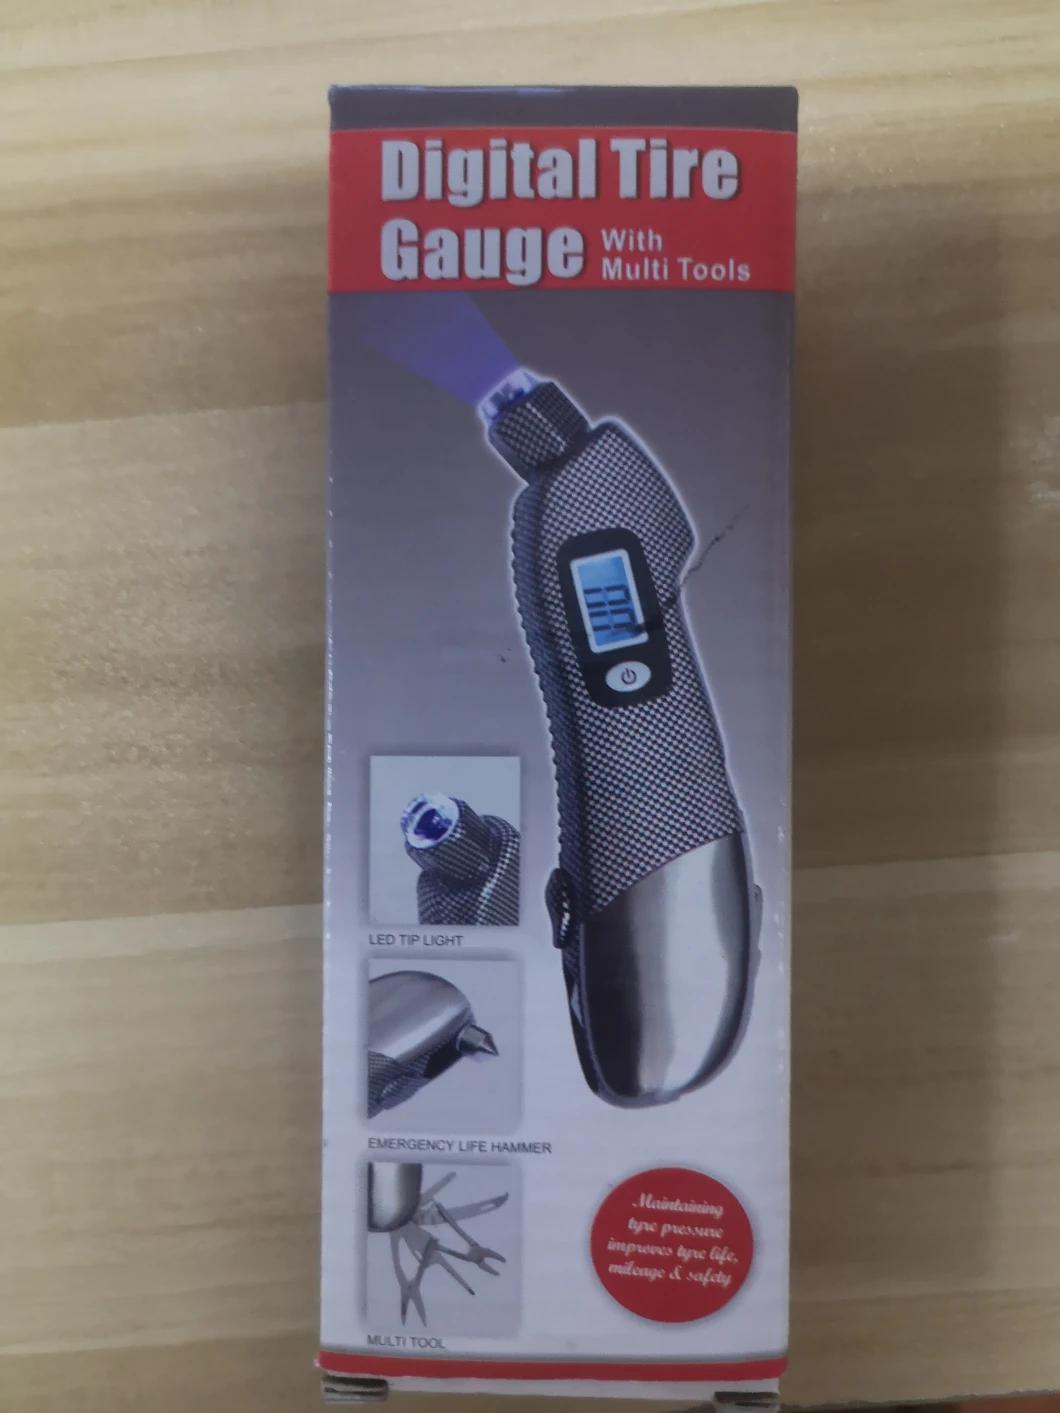 Multi Function 150 Psi Digital Tire Gauge with Emergency Tool and LCD Light